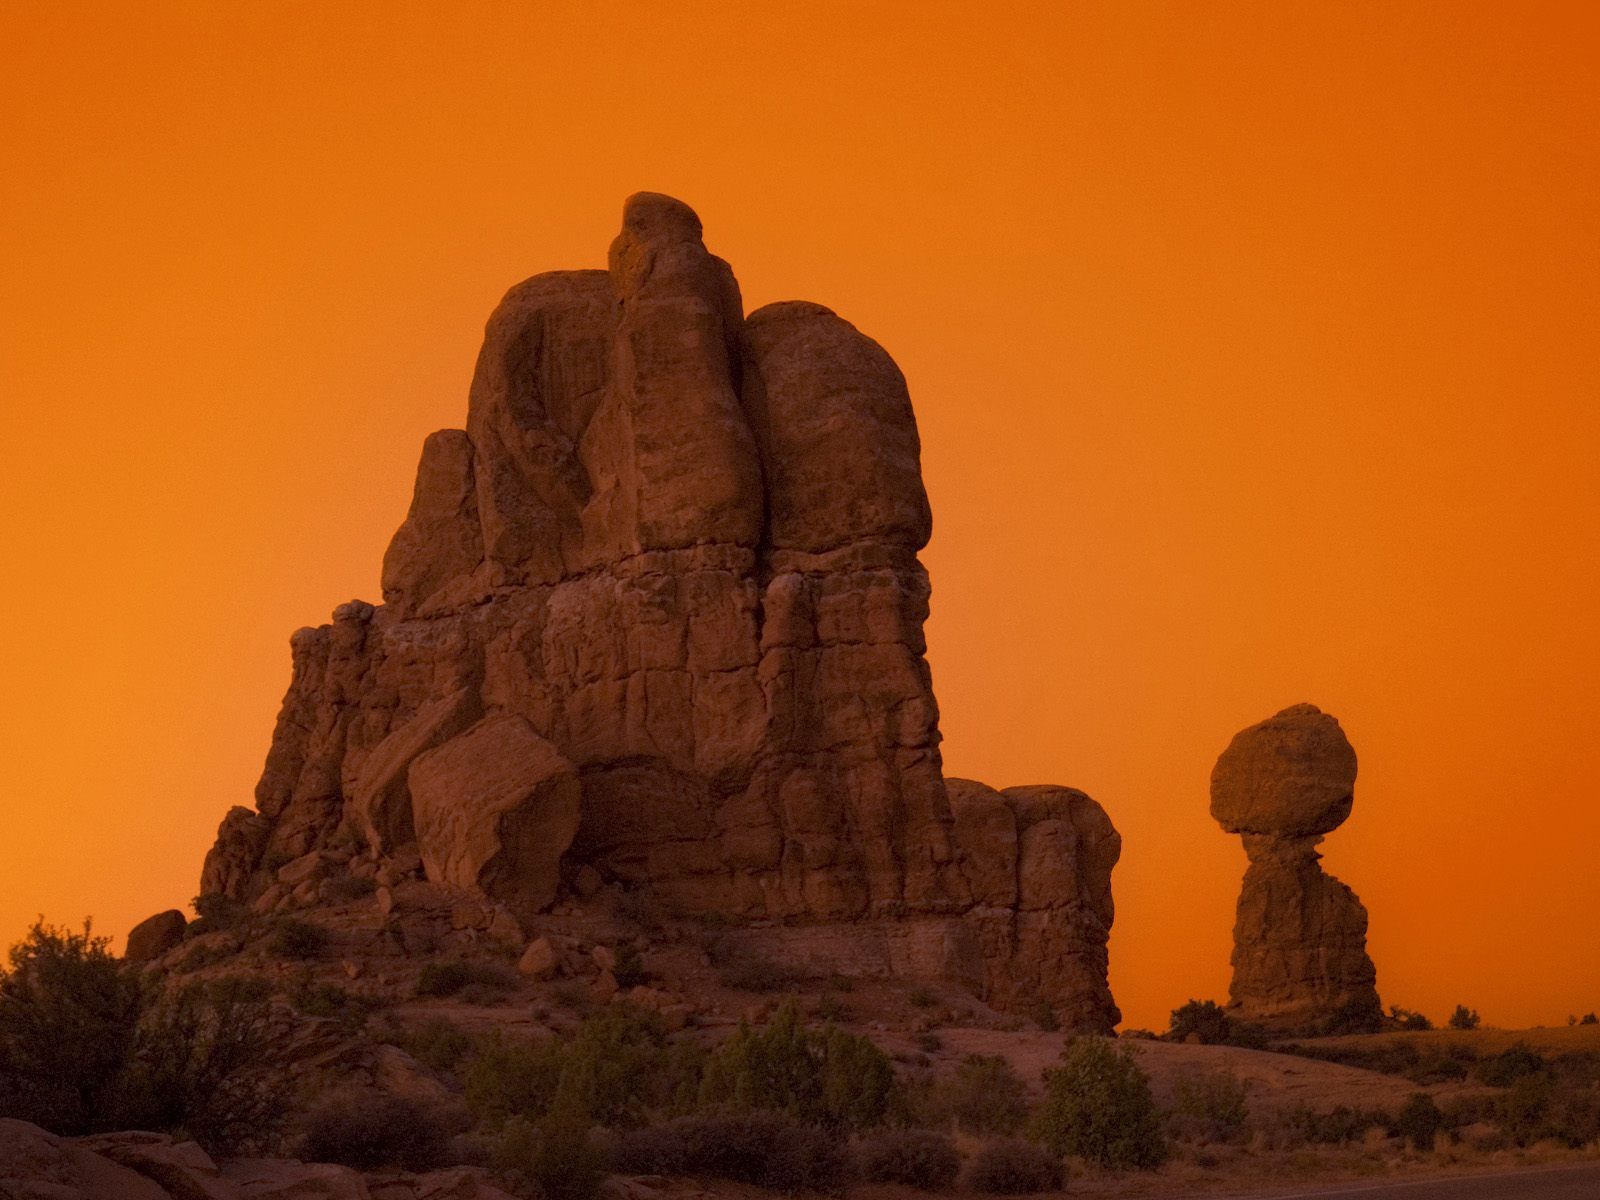 Nature: Balanced Rock, Arches National Park, Utah, picture nr. 39657